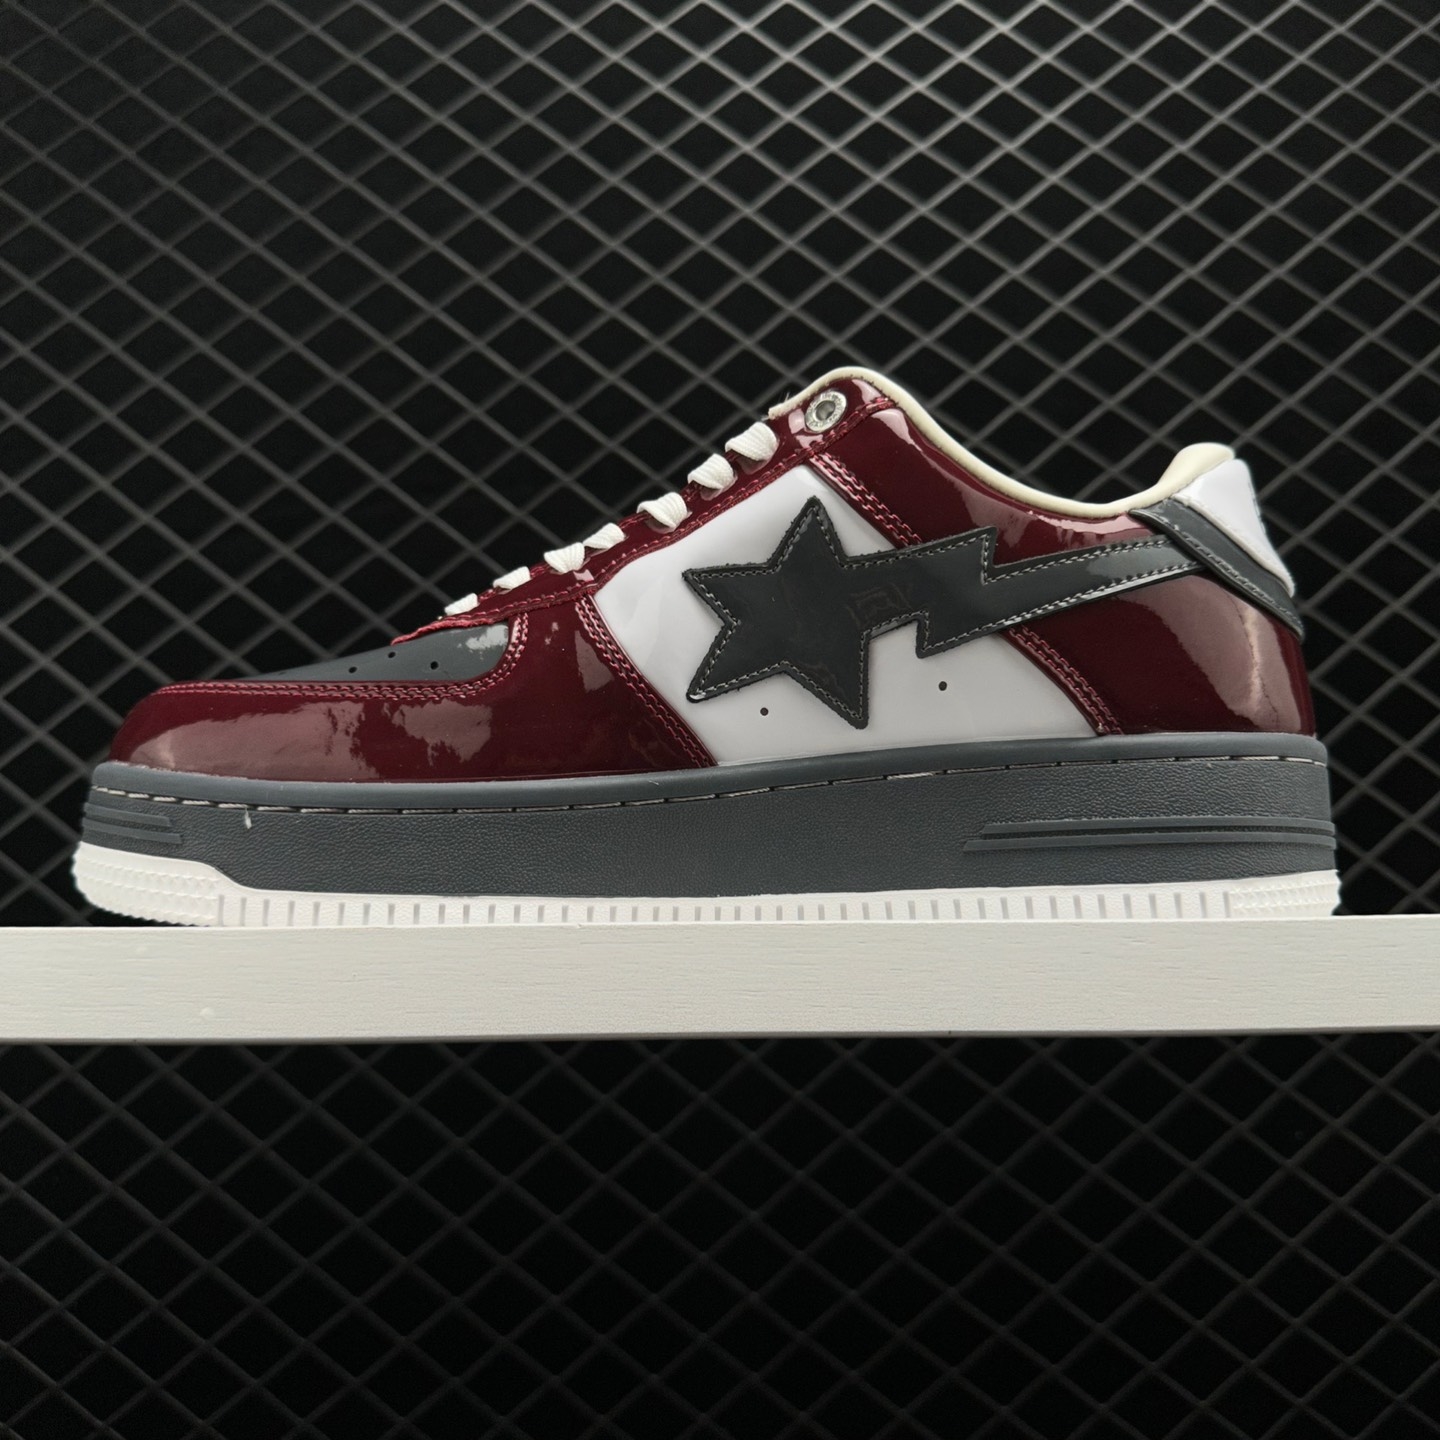 A BATHING APE Bape Sta Wine Red White 1I80-191-006-WRG - Limited Edition Sneakers